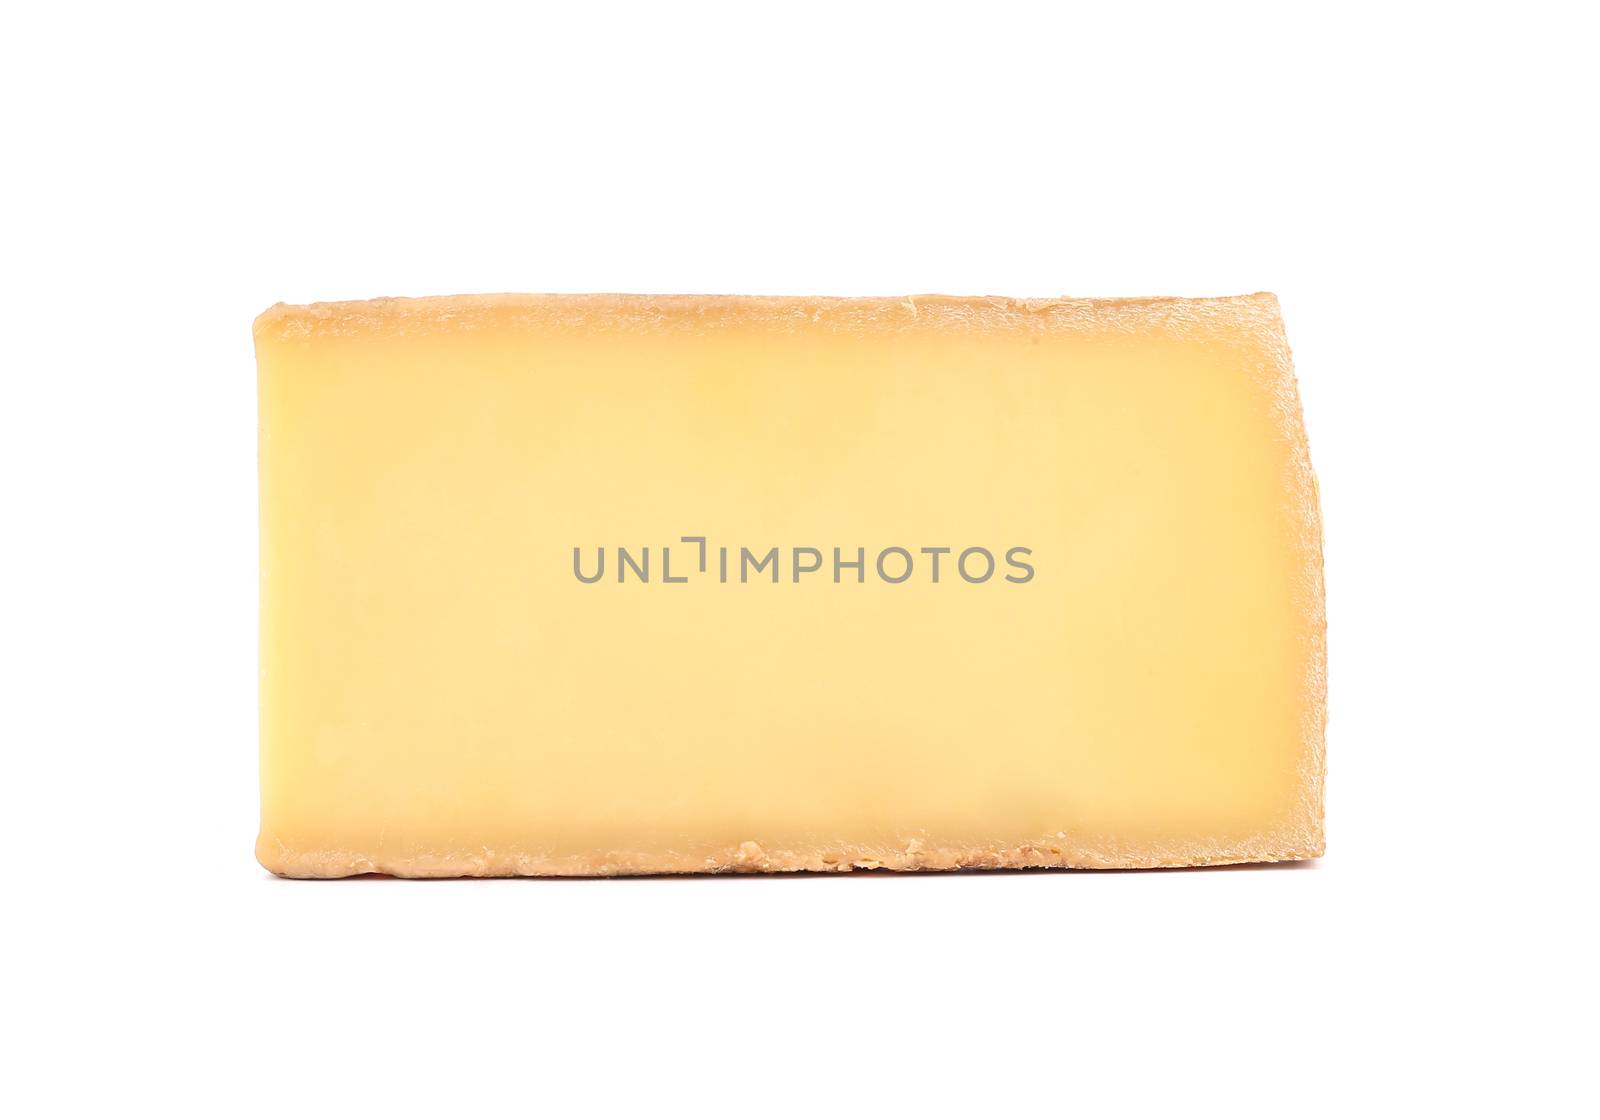 Block of parmesan cheese. Isolated on a white background.